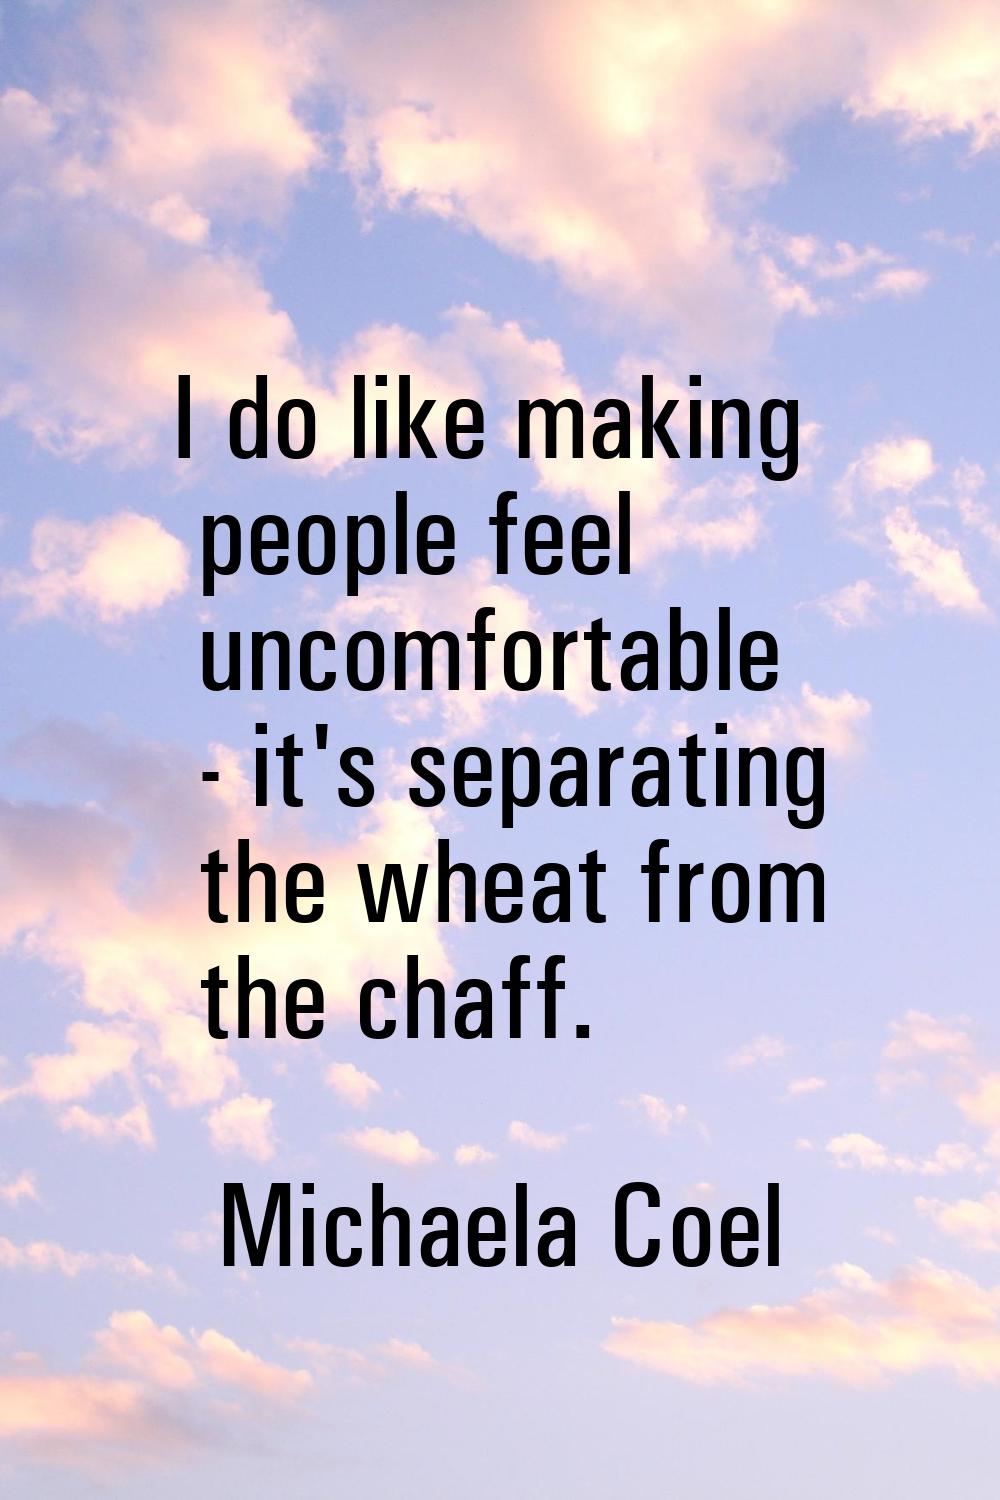 I do like making people feel uncomfortable - it's separating the wheat from the chaff.